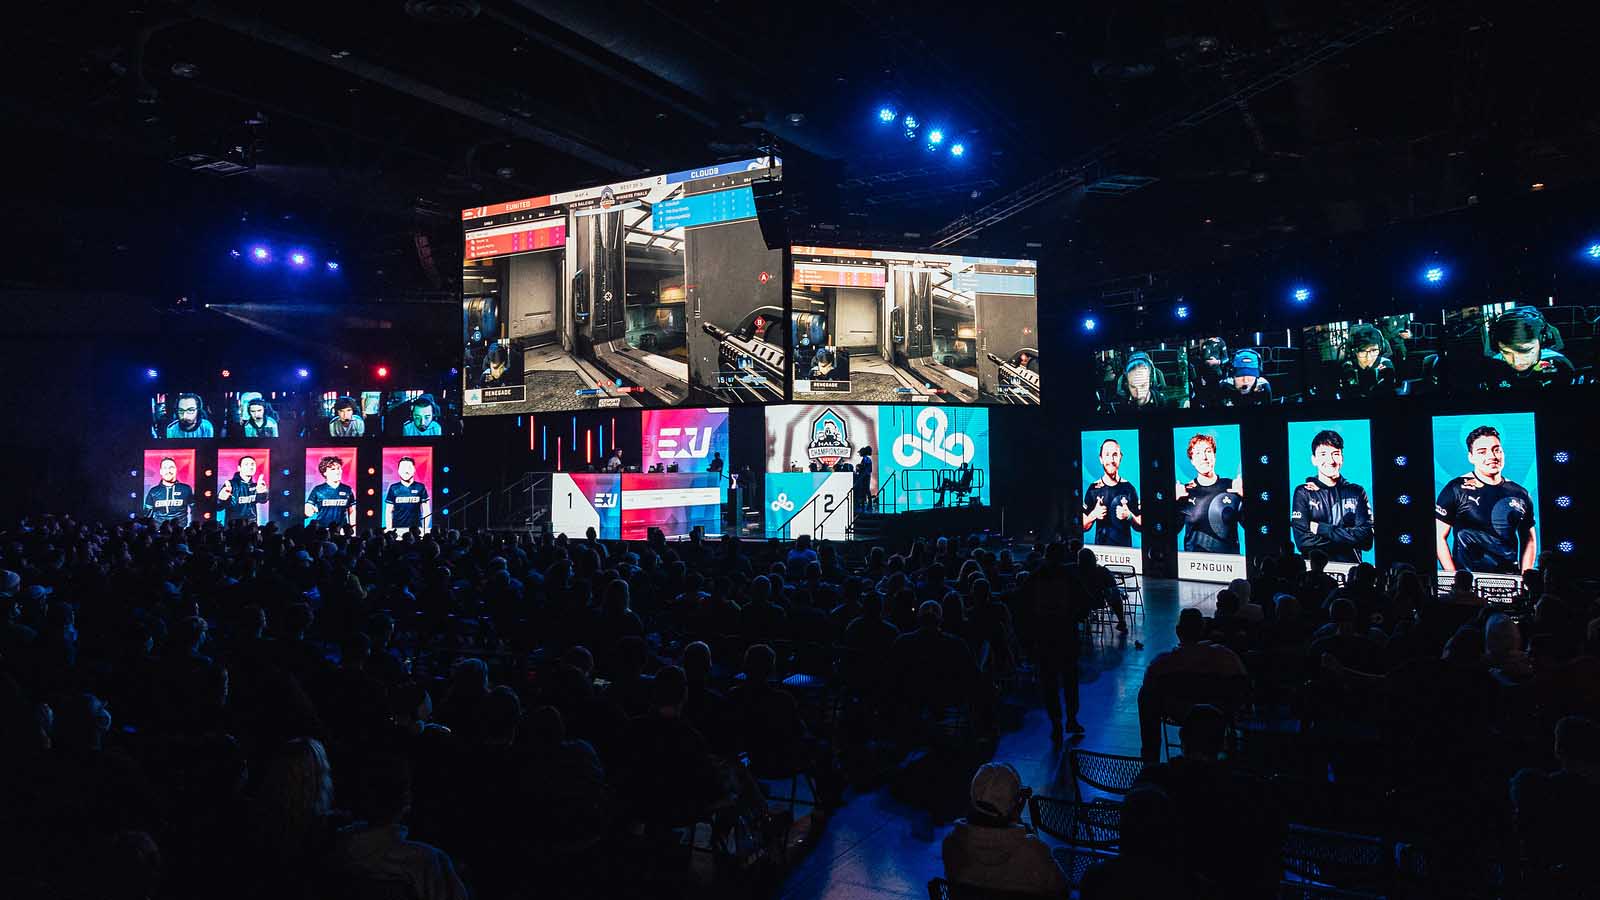 eUnited takes on Cloud 9 at the HCS Major in Raleigh last December. (Photo: 343 Industries)